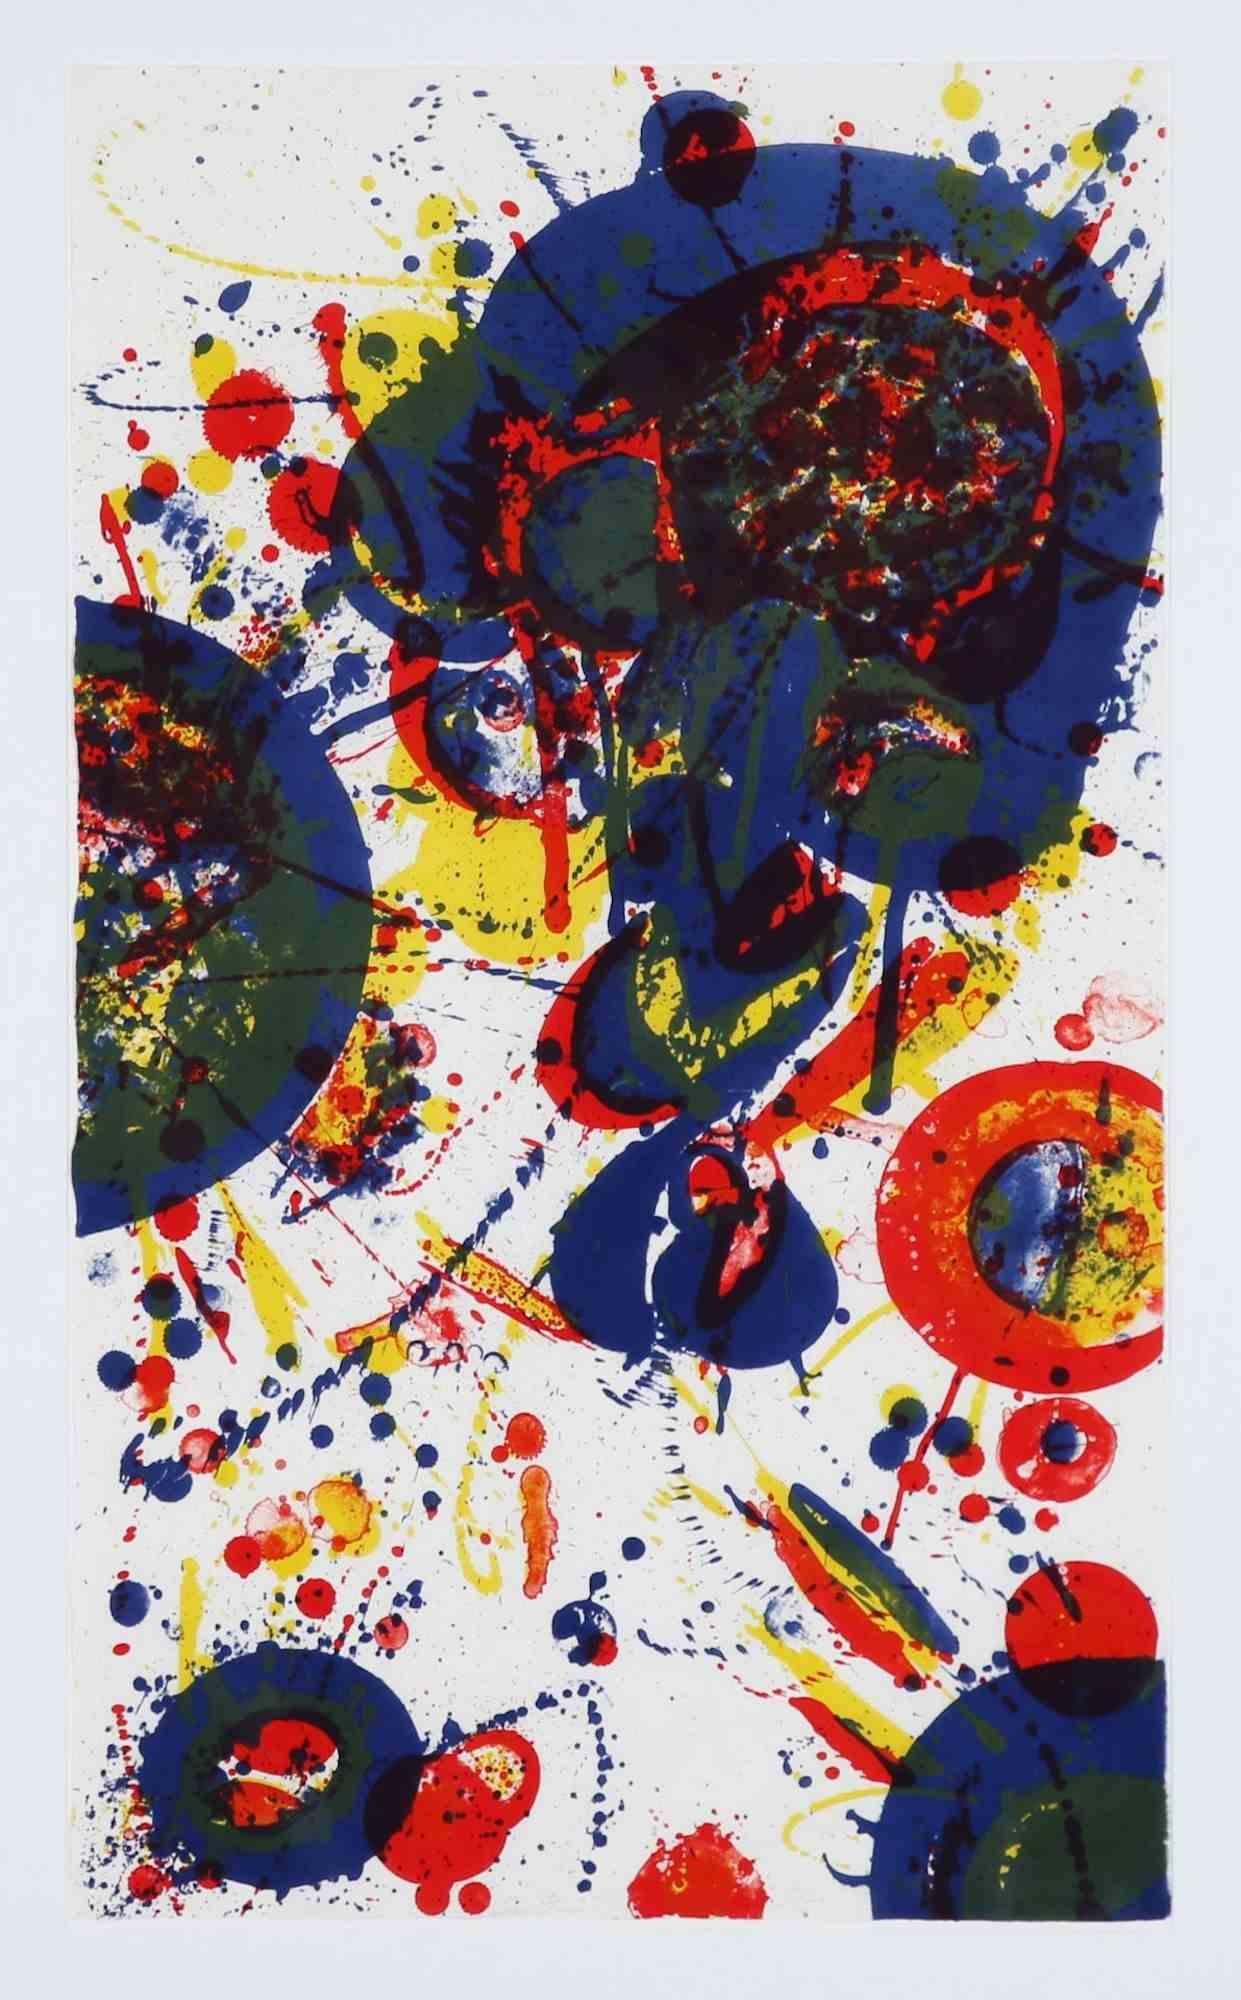 Tokyo Mon Amour is an artwork realized by Sam Francis (1923 San Mateo, California) in 1963. 

Color lithograph. Hand signed and numbered 4/25.

80x47 cm not framed. 

Printed by Joe Funk for Joseph Press, Los Angeles.

Excellent conditions.

Ref. sf